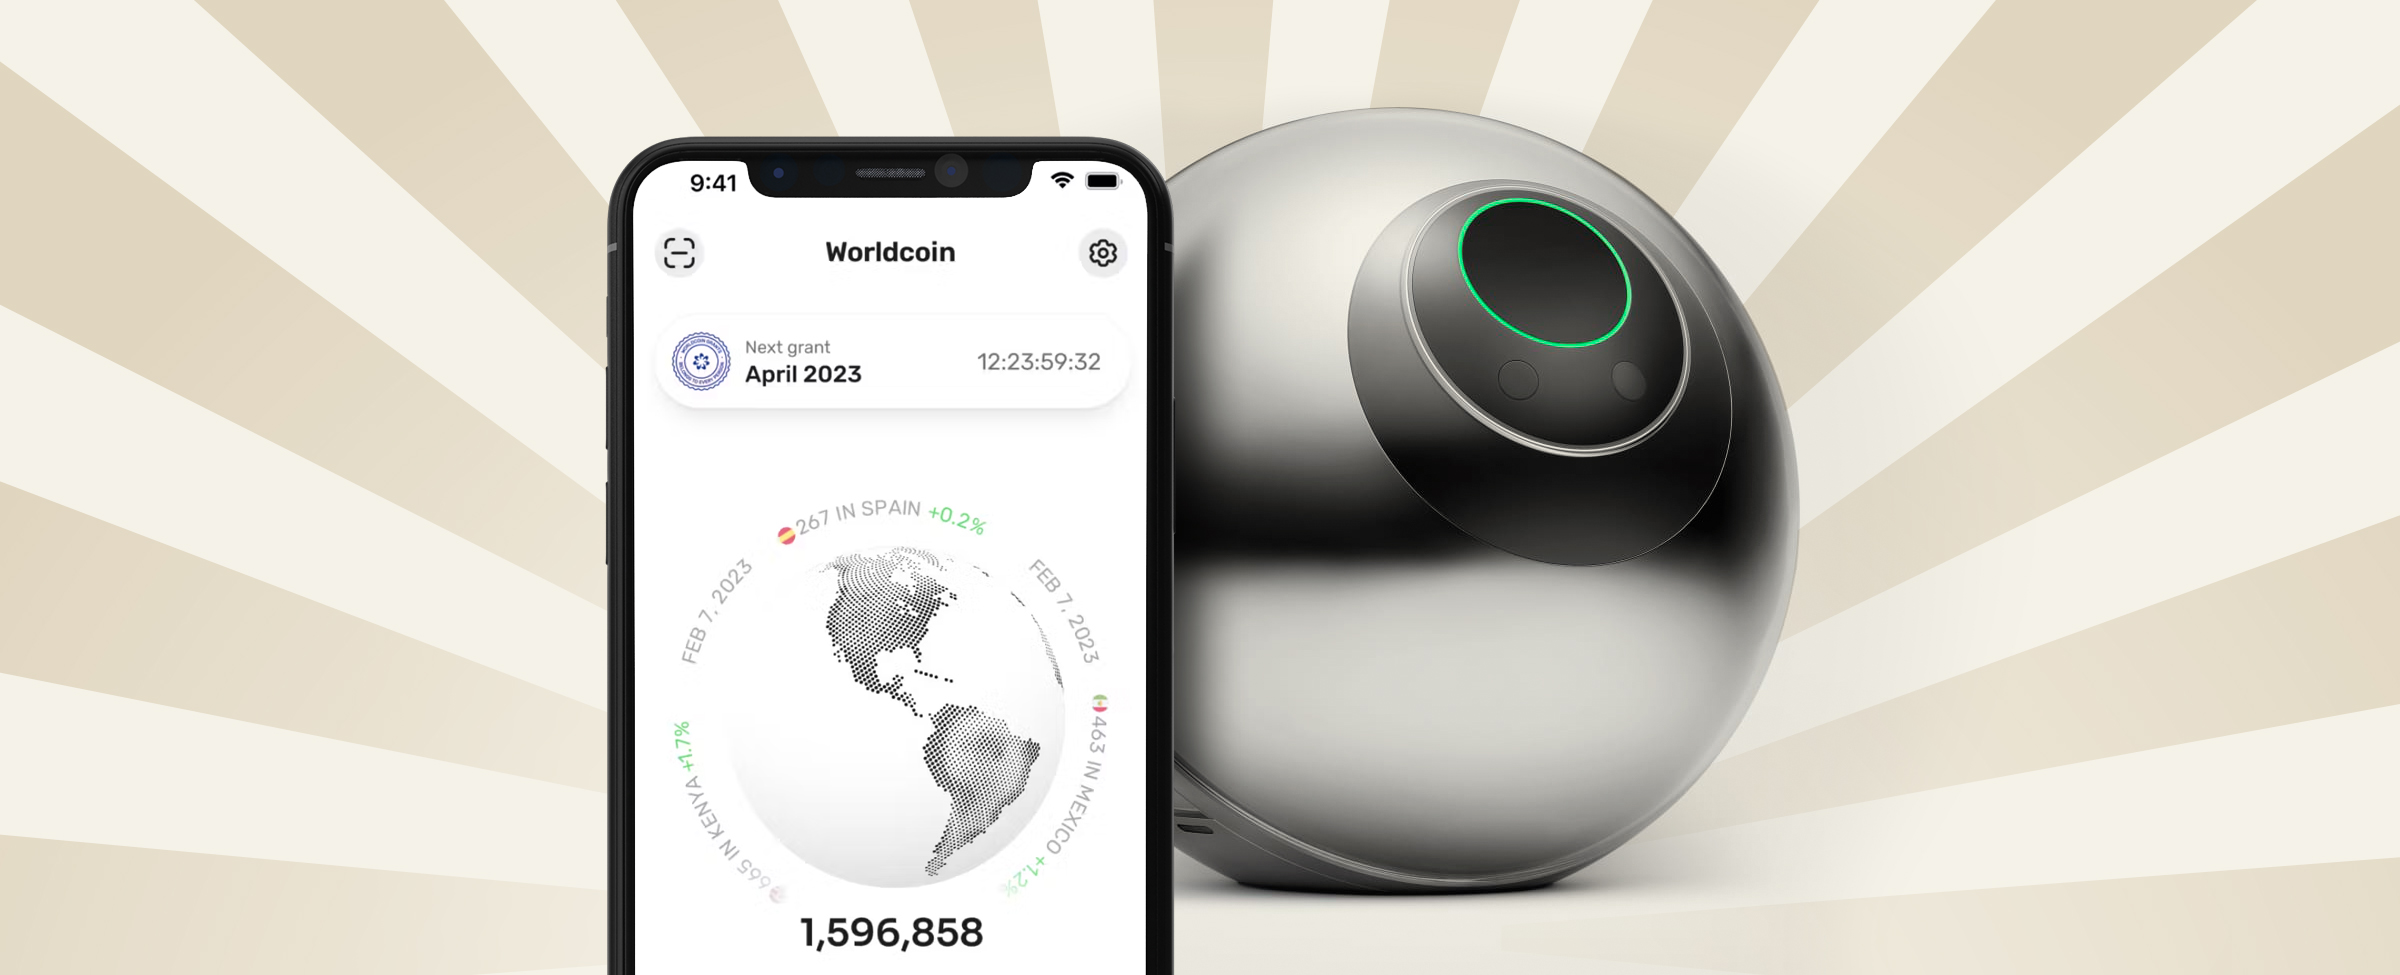 We see a mobile phone with the Worldcoin app open, displaying a gray globe of the world with various prices listed circling around it. To its right is a 3D-animated eye scanner in the form of a ball made of silver material, with a scanning lens on top with a green circle. Behind, is a duo-tone gold and silver striped background.